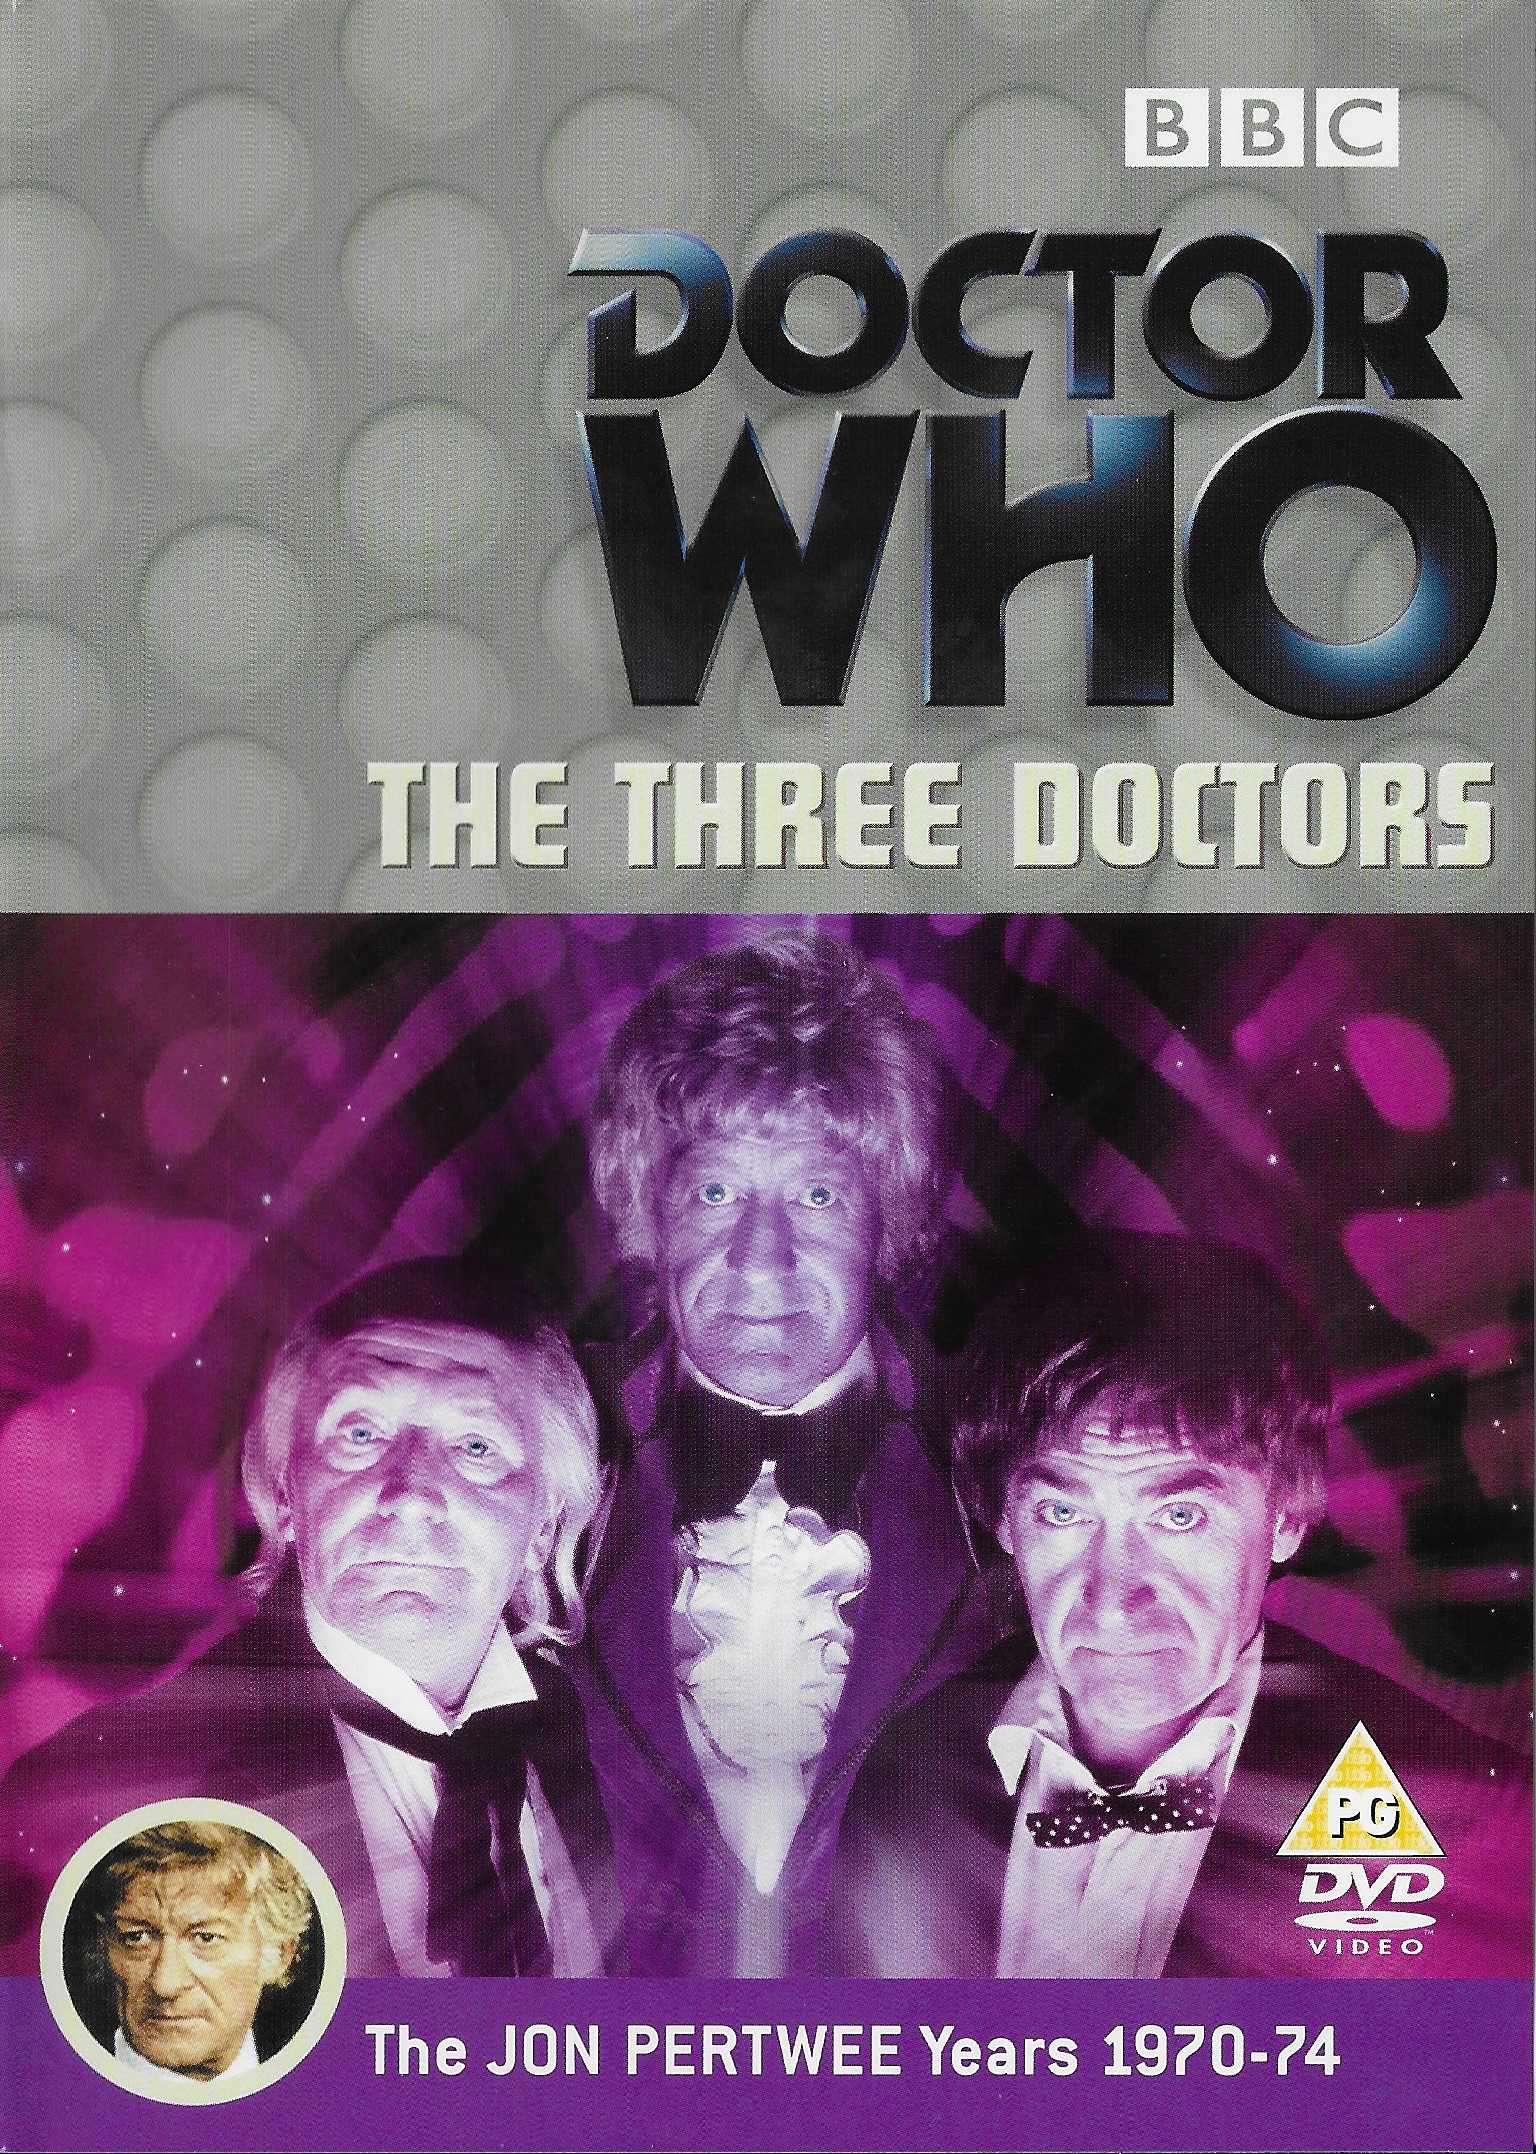 Picture of BBCDVD 1144 Doctor Who - The three doctors by artist Bob Baker / Dave Martin from the BBC dvds - Records and Tapes library